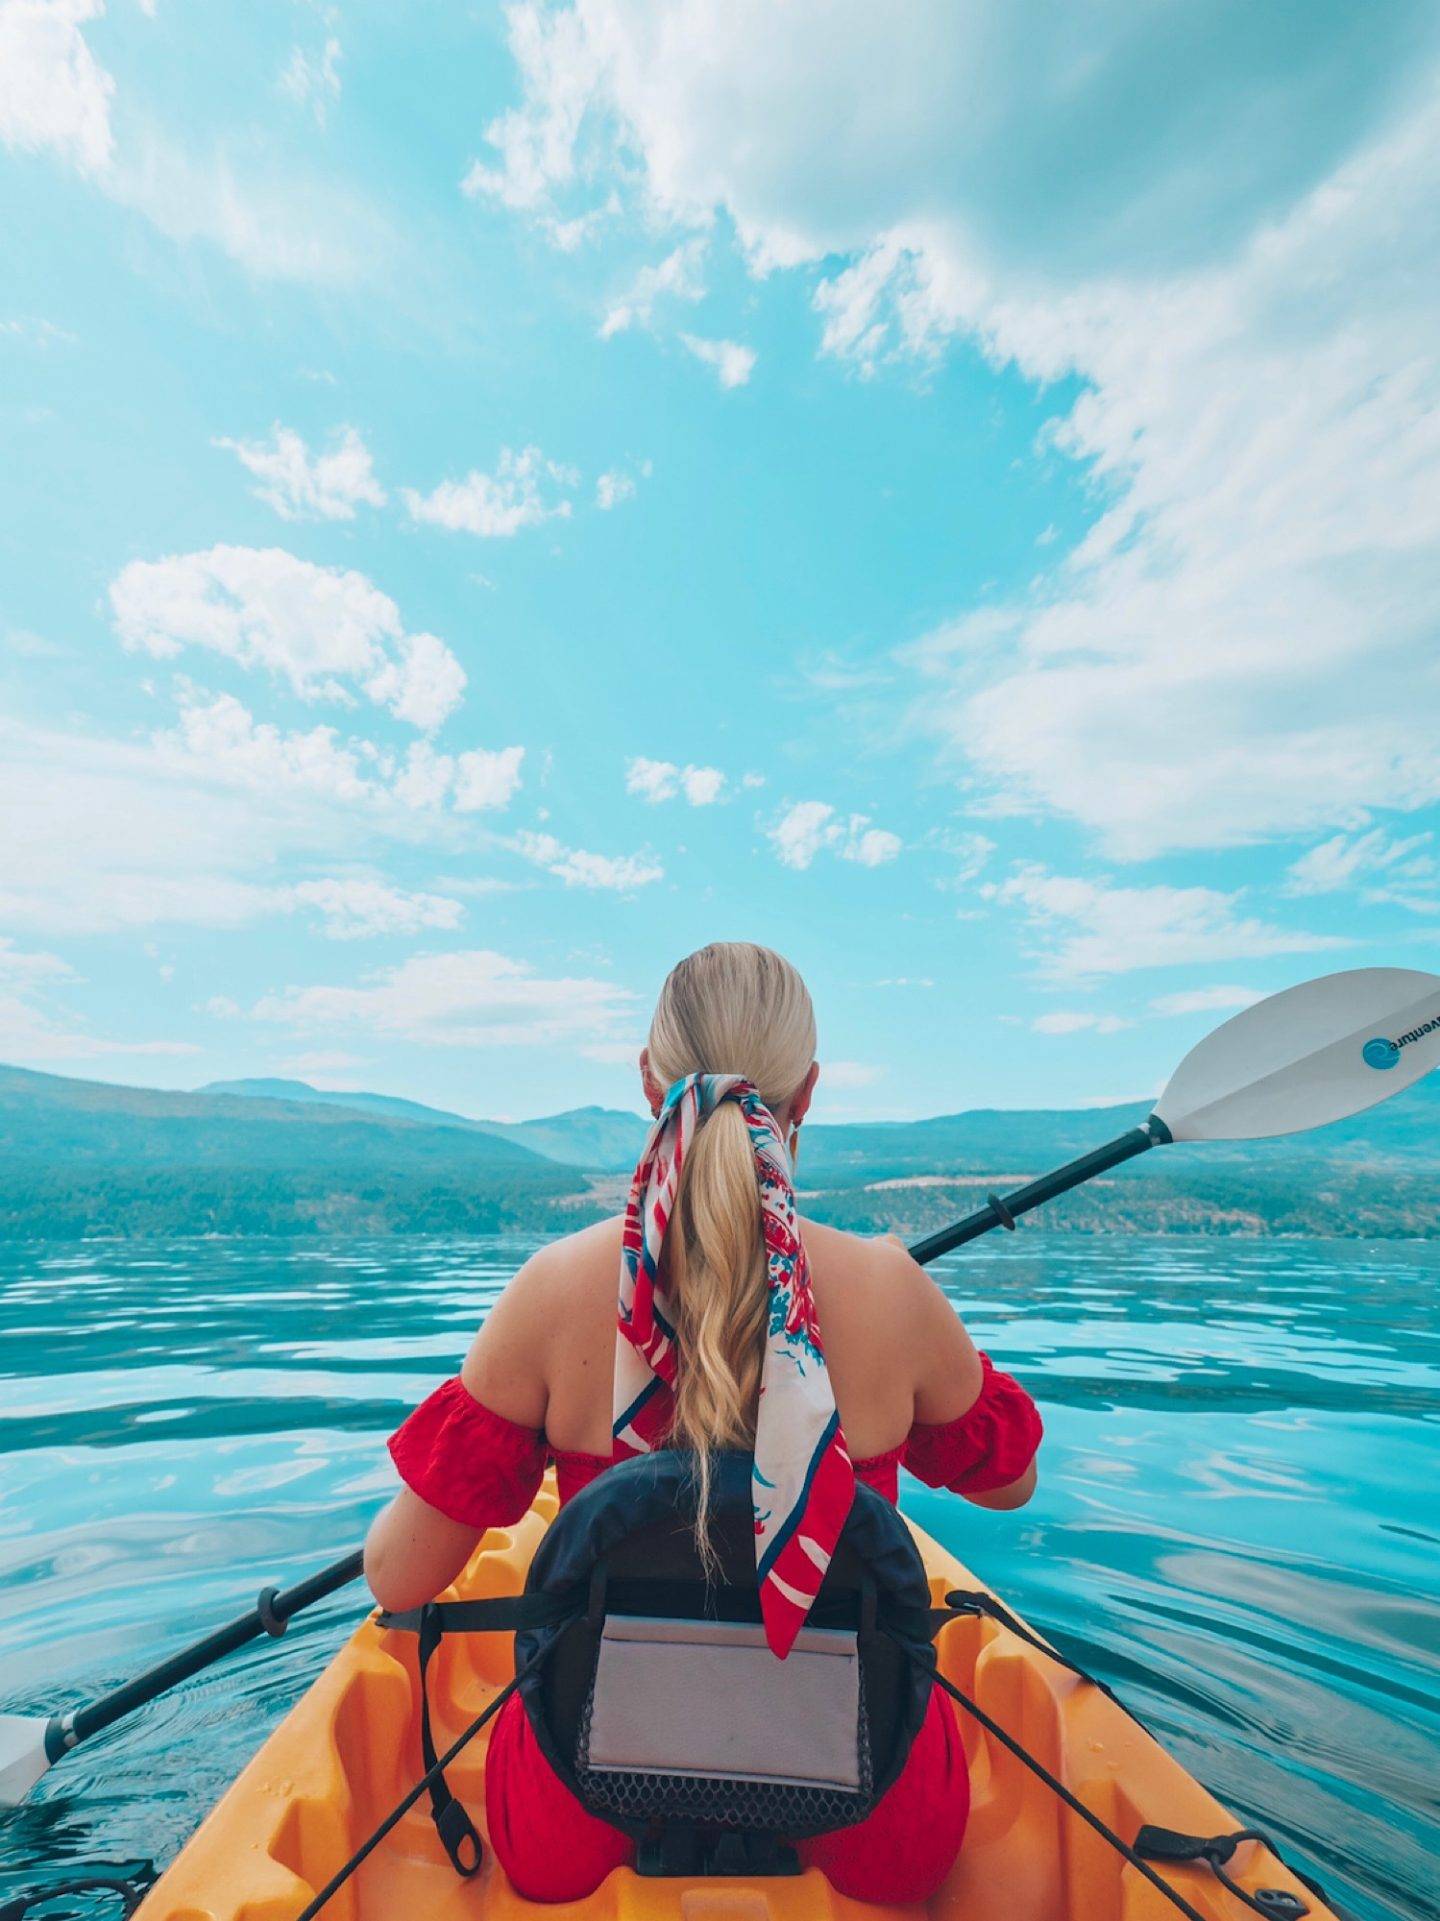 Kayaking in Kelowna is a must do while visiting!